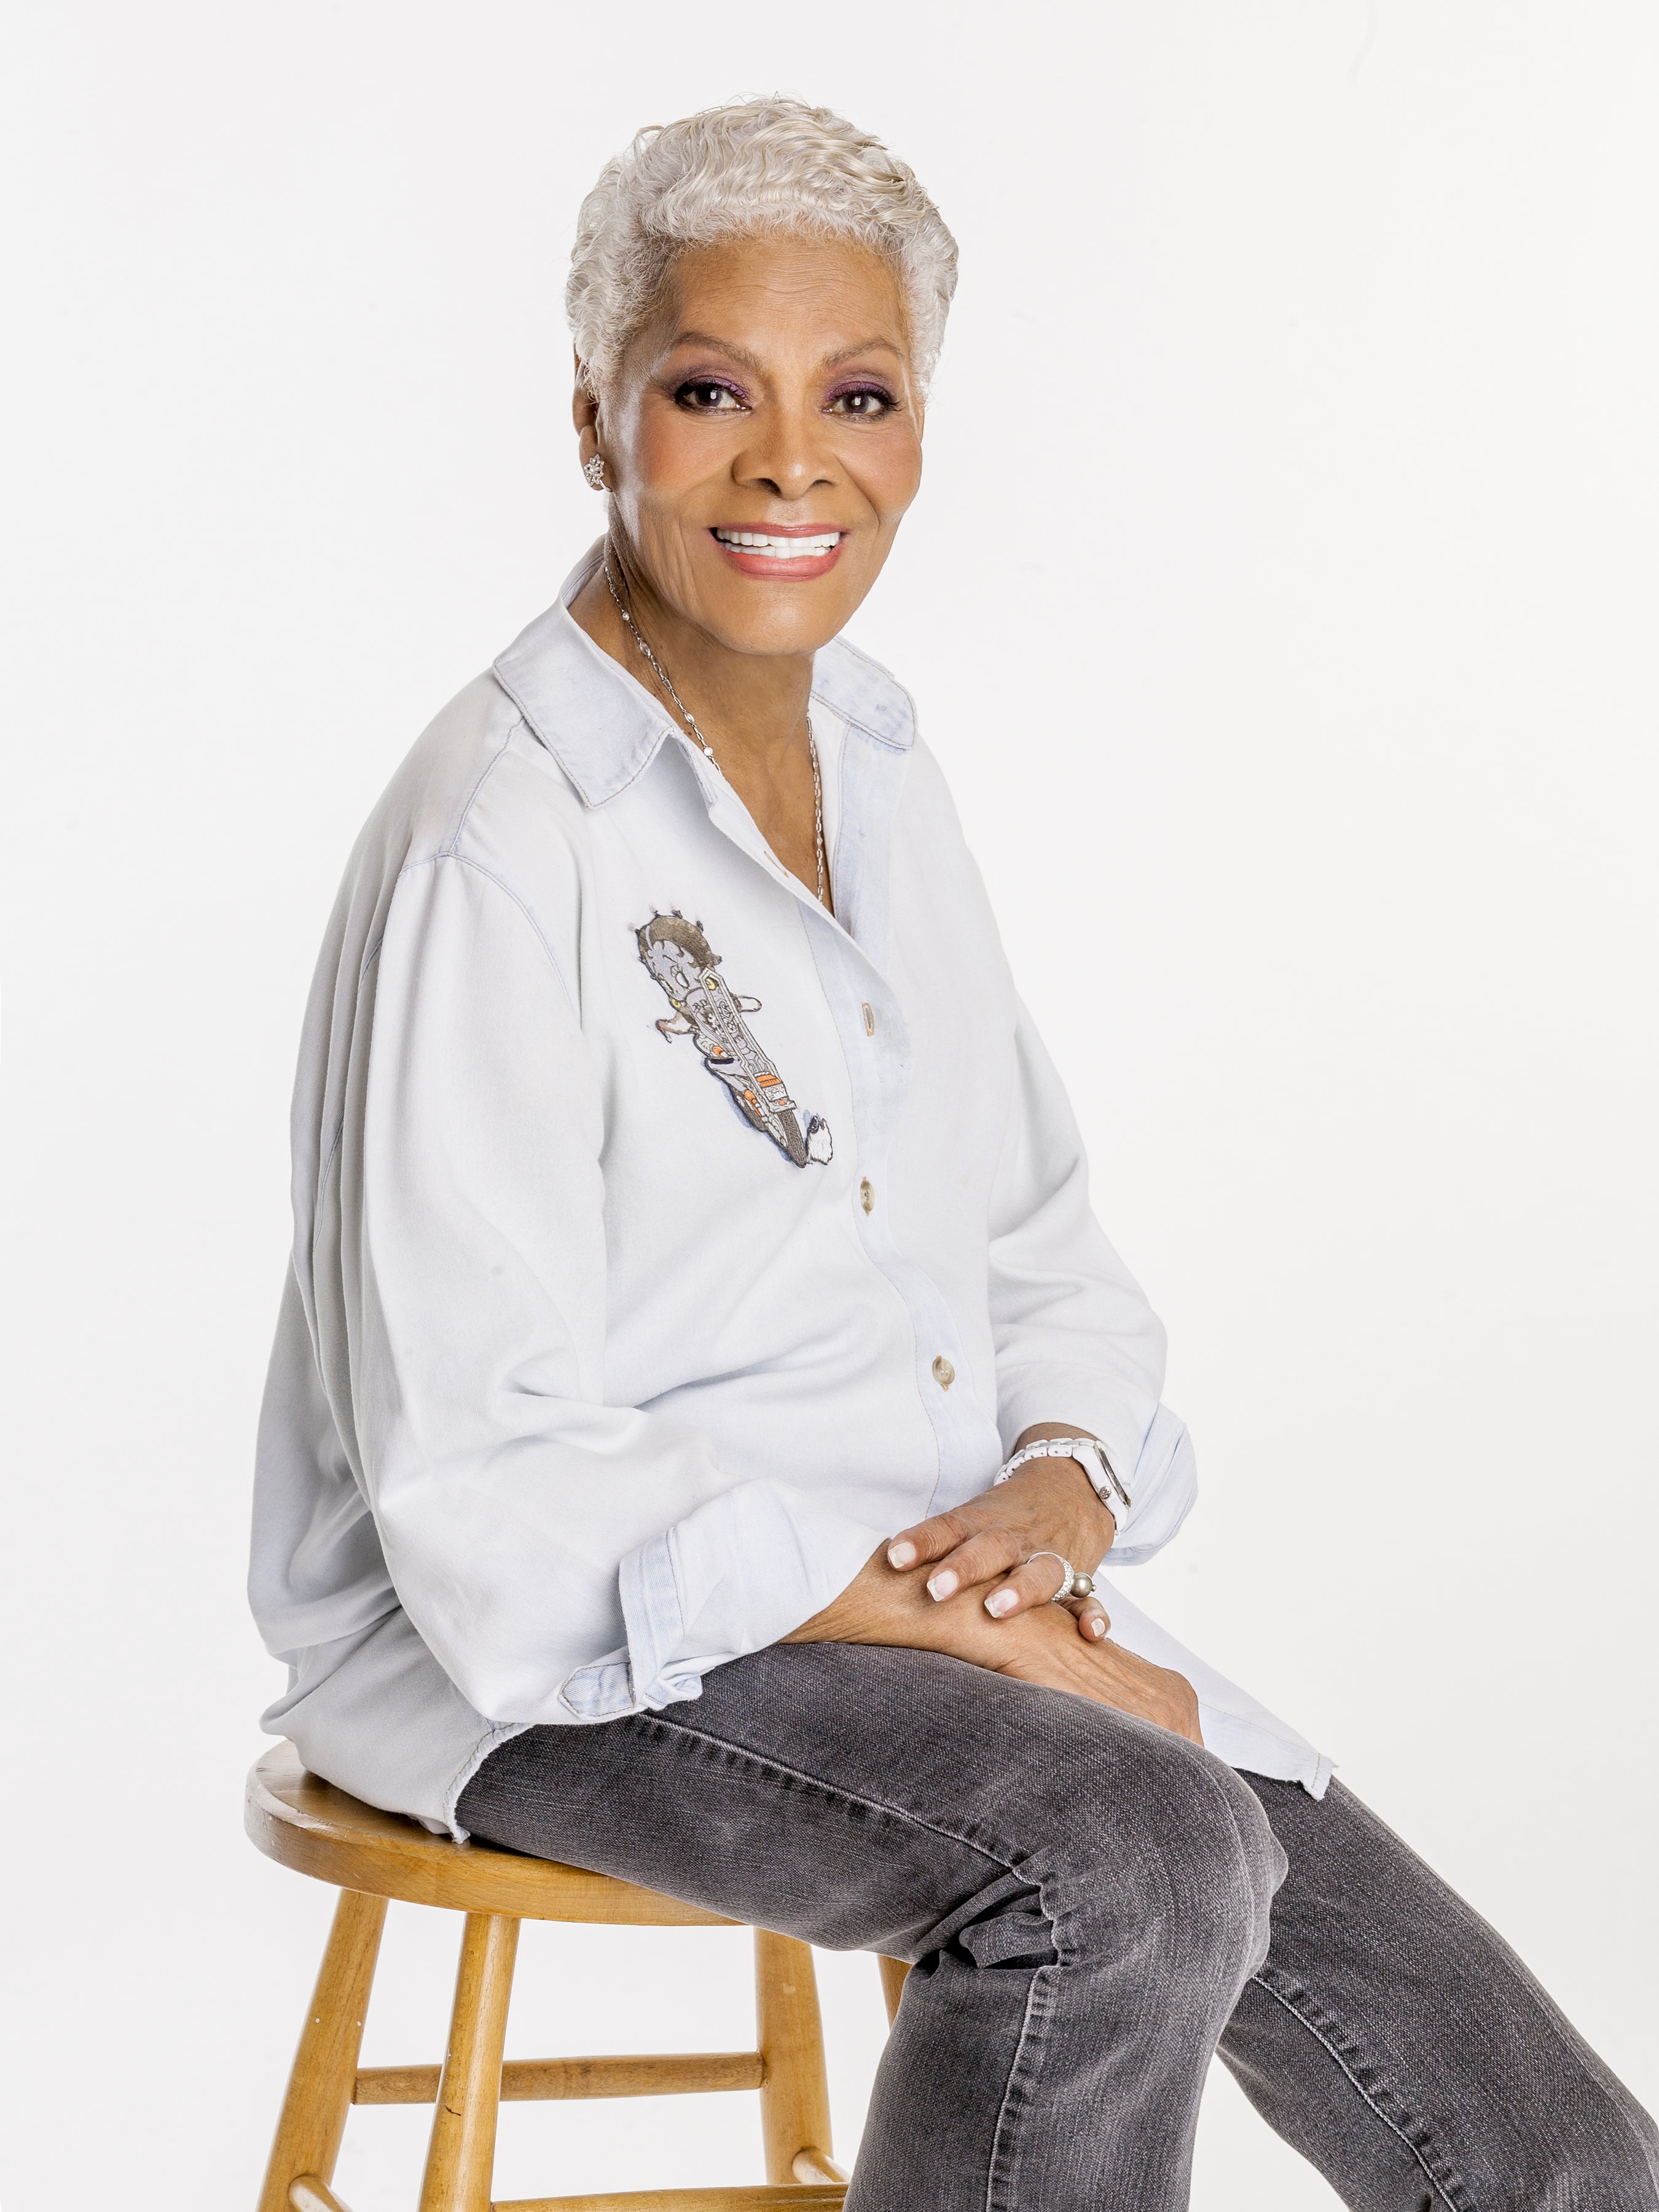 Dionne Warwick: Don't Make Me Over in London promo photo for Priority from O2 presale offer code